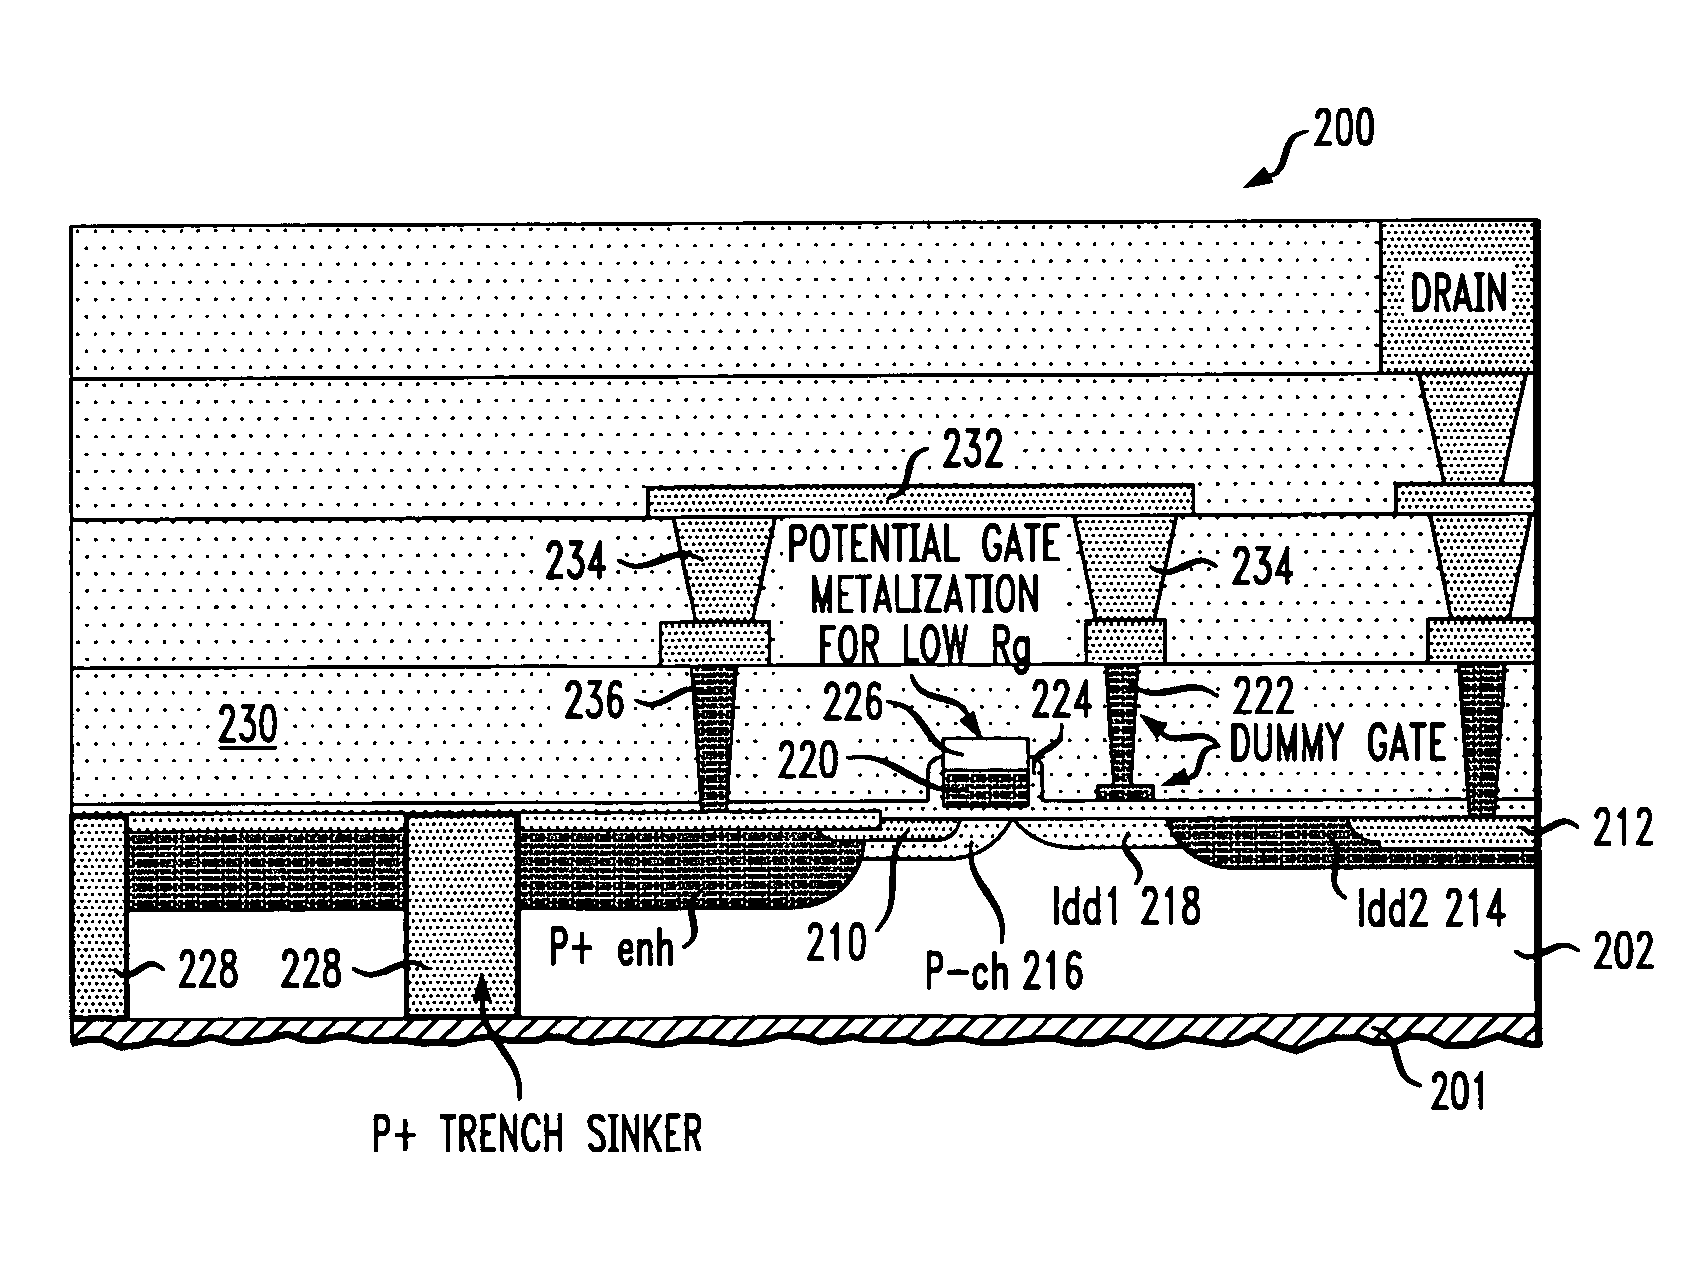 Shielding structure for use in a metal-oxide-semiconductor device